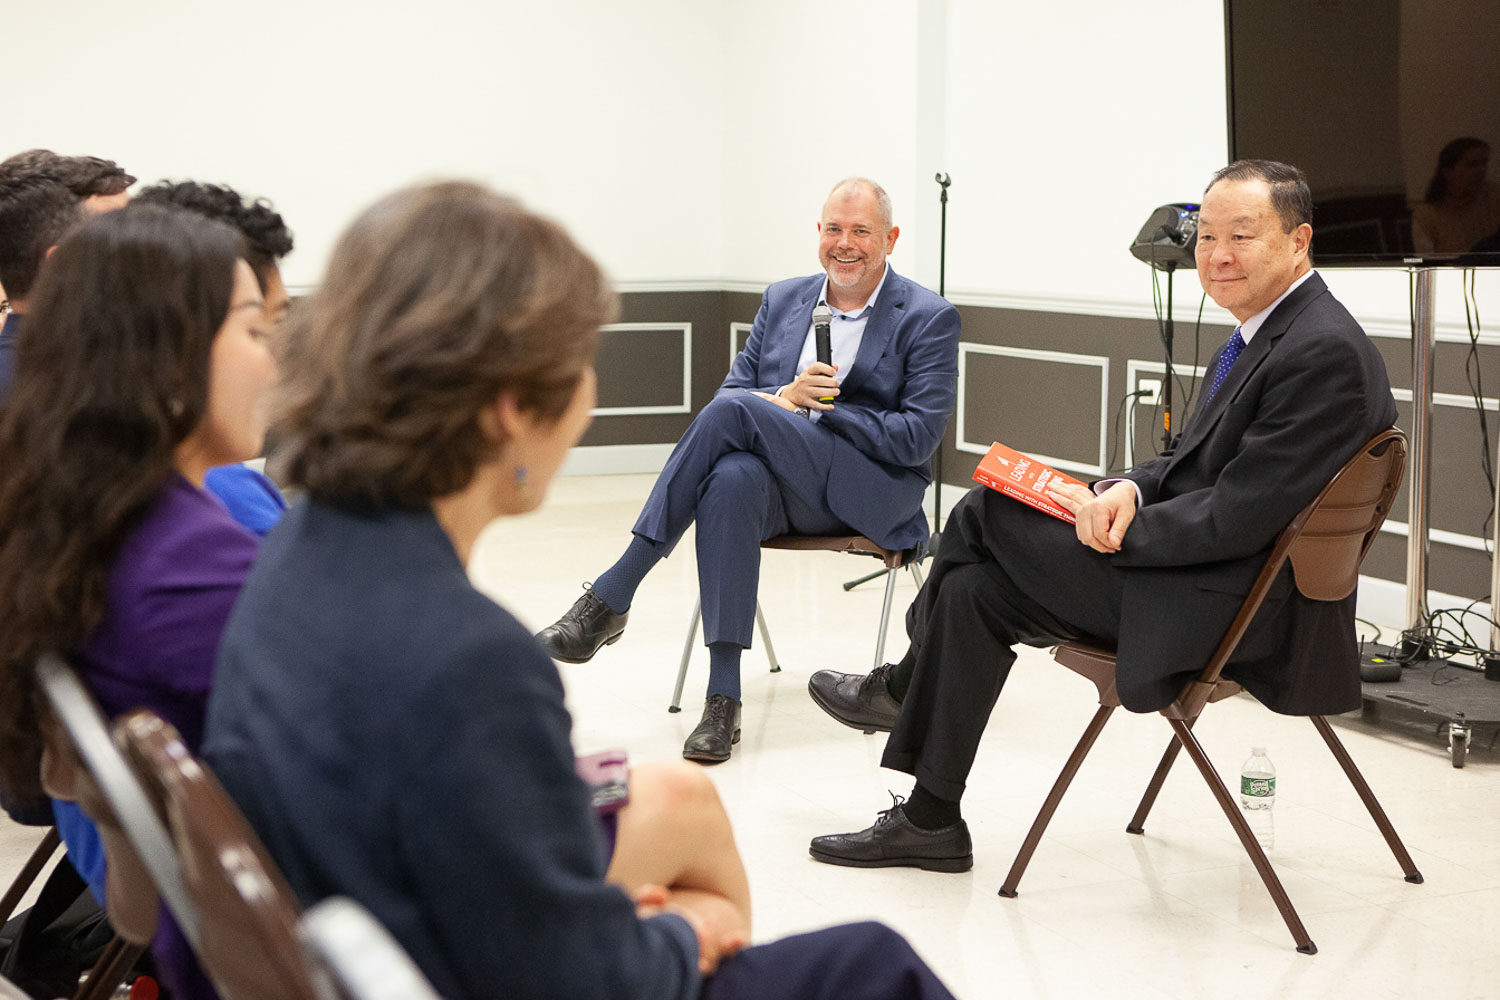 Murray Koppelman School of Business Executive-In-Residence and Aon Executive Vice President Aaron Olson (left) and Dean Qing Hu (right) discuss the insurance industry in front of an audience of students and faculty in spring.